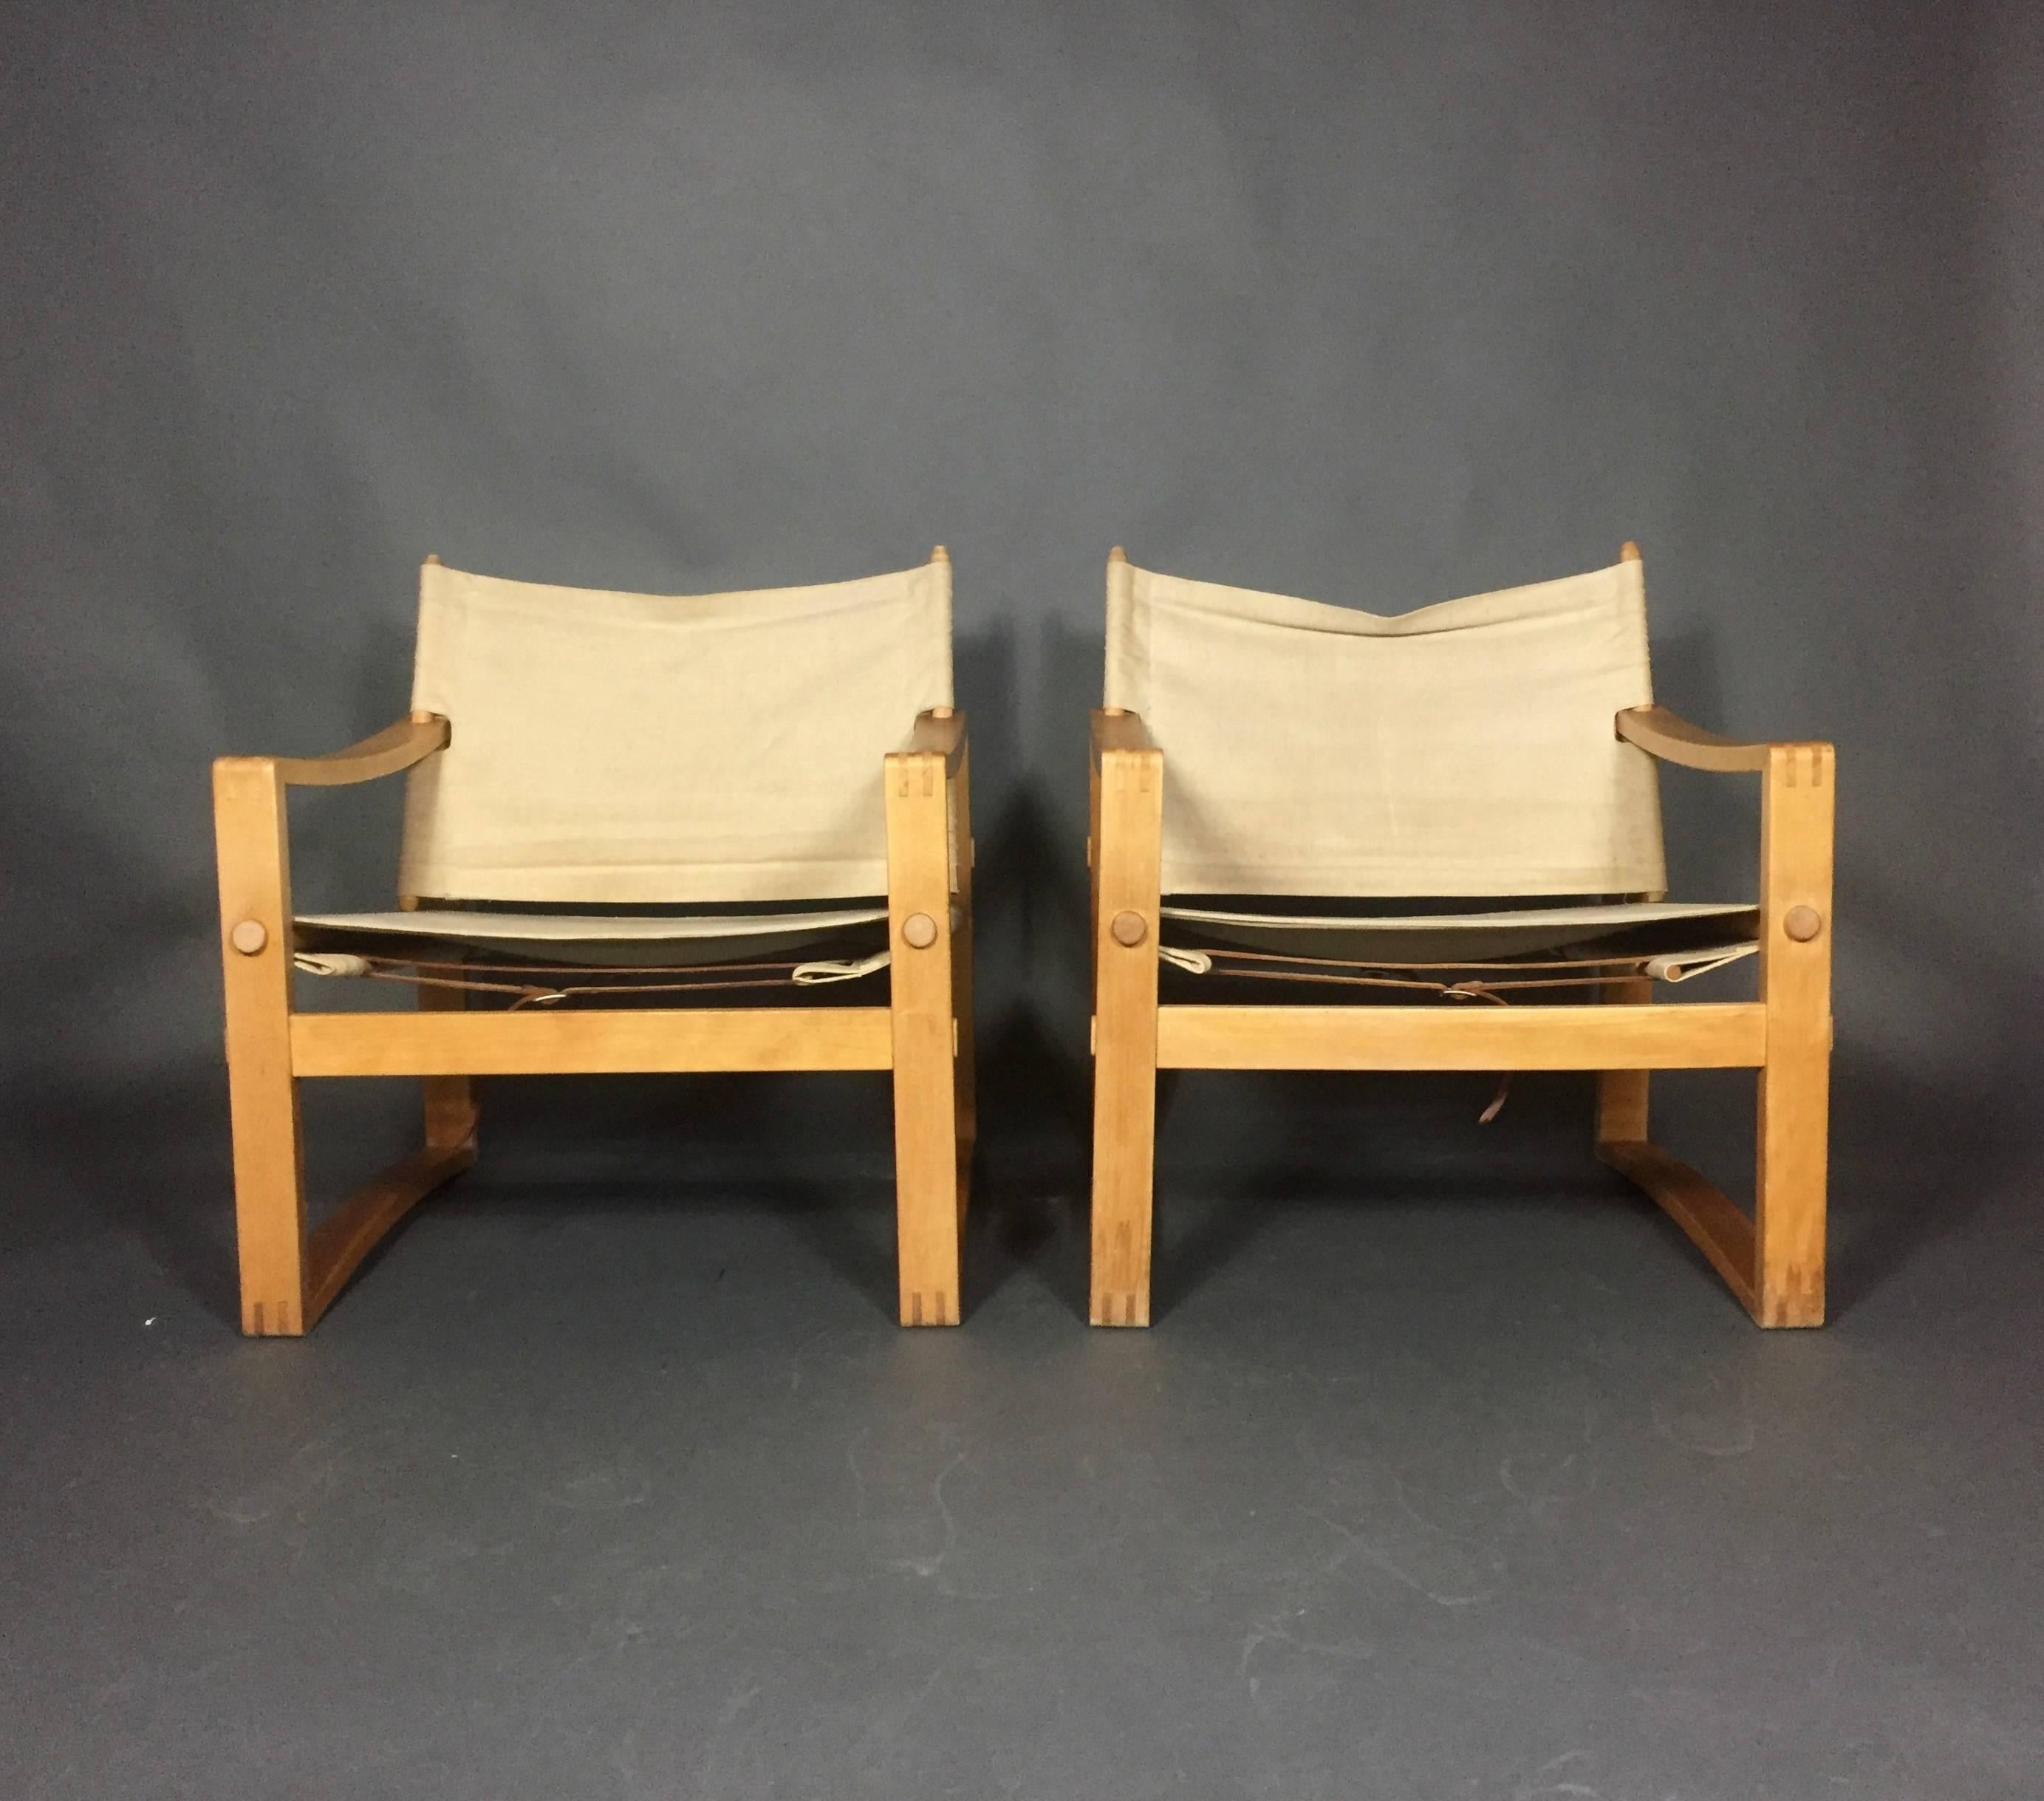 Pair of Safari armchair designed by Børge Jensen & Sønne with an all-doweled beech frame and canvas seating supported by leather straps underneath. Back swivel adds to comfort. This pair nicely made without finish or lacquer. Manufactured by